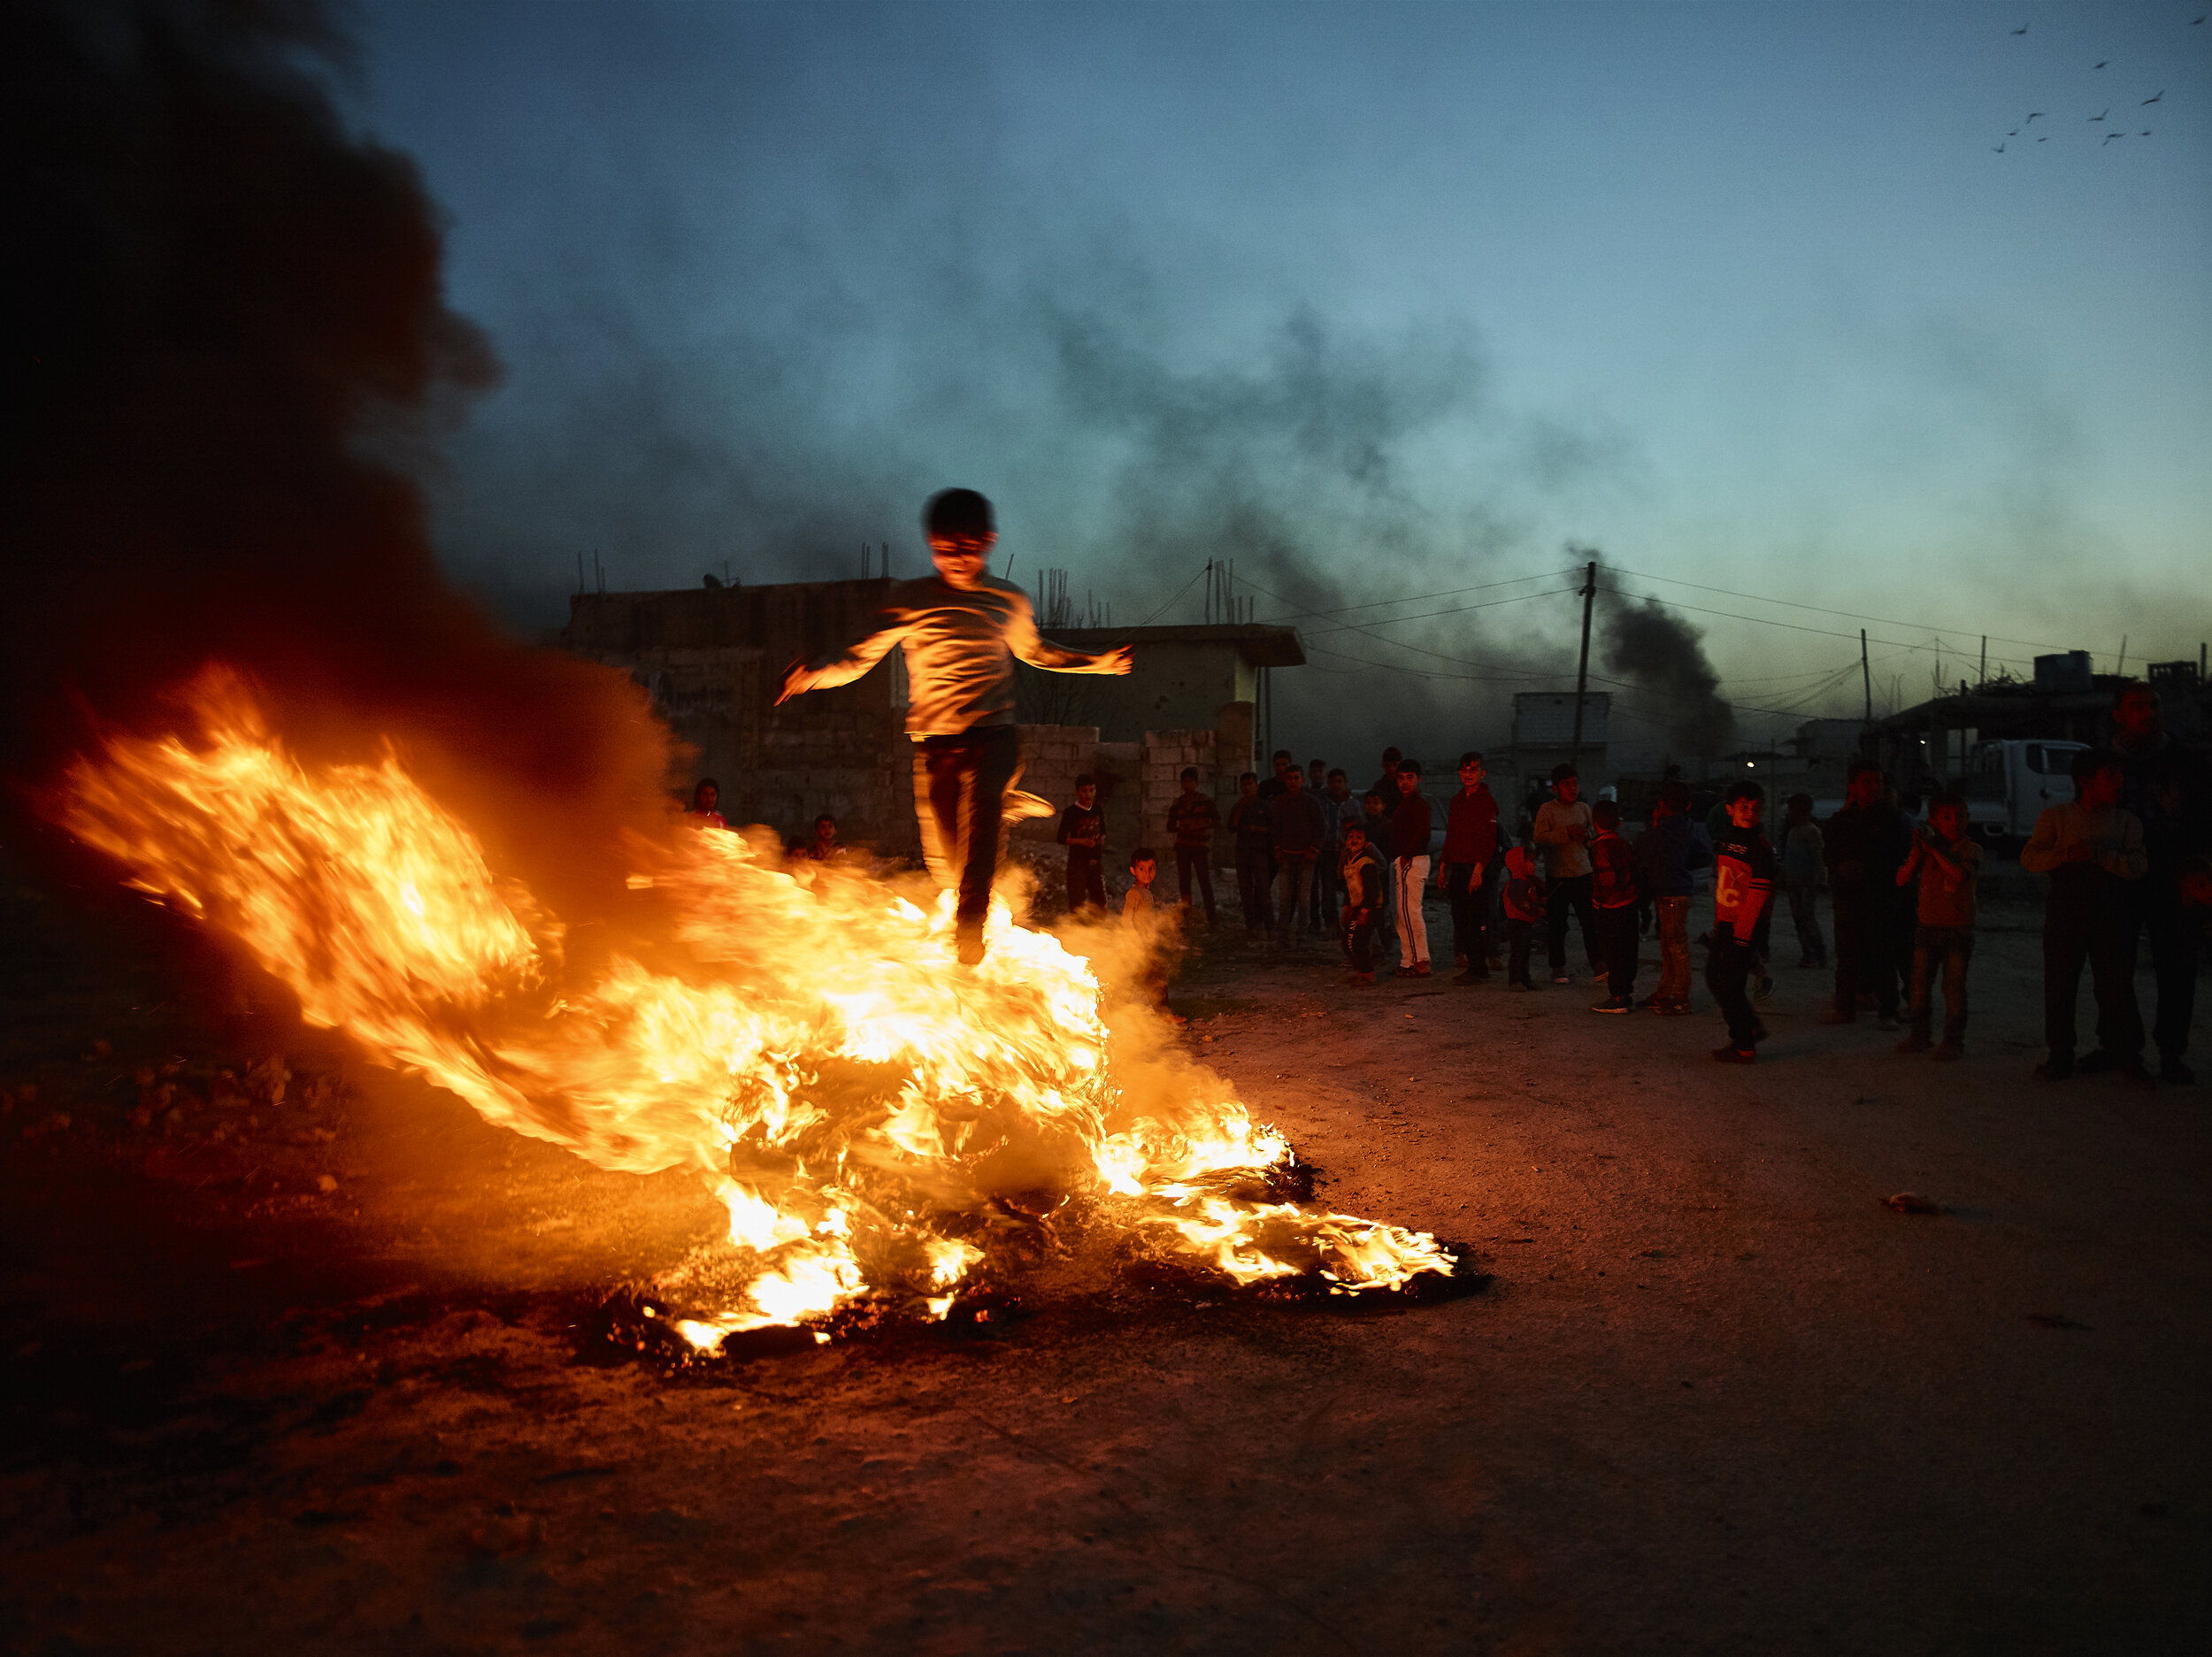 A young boy jumps over flaming tires during Newroz celebrations in Kobane